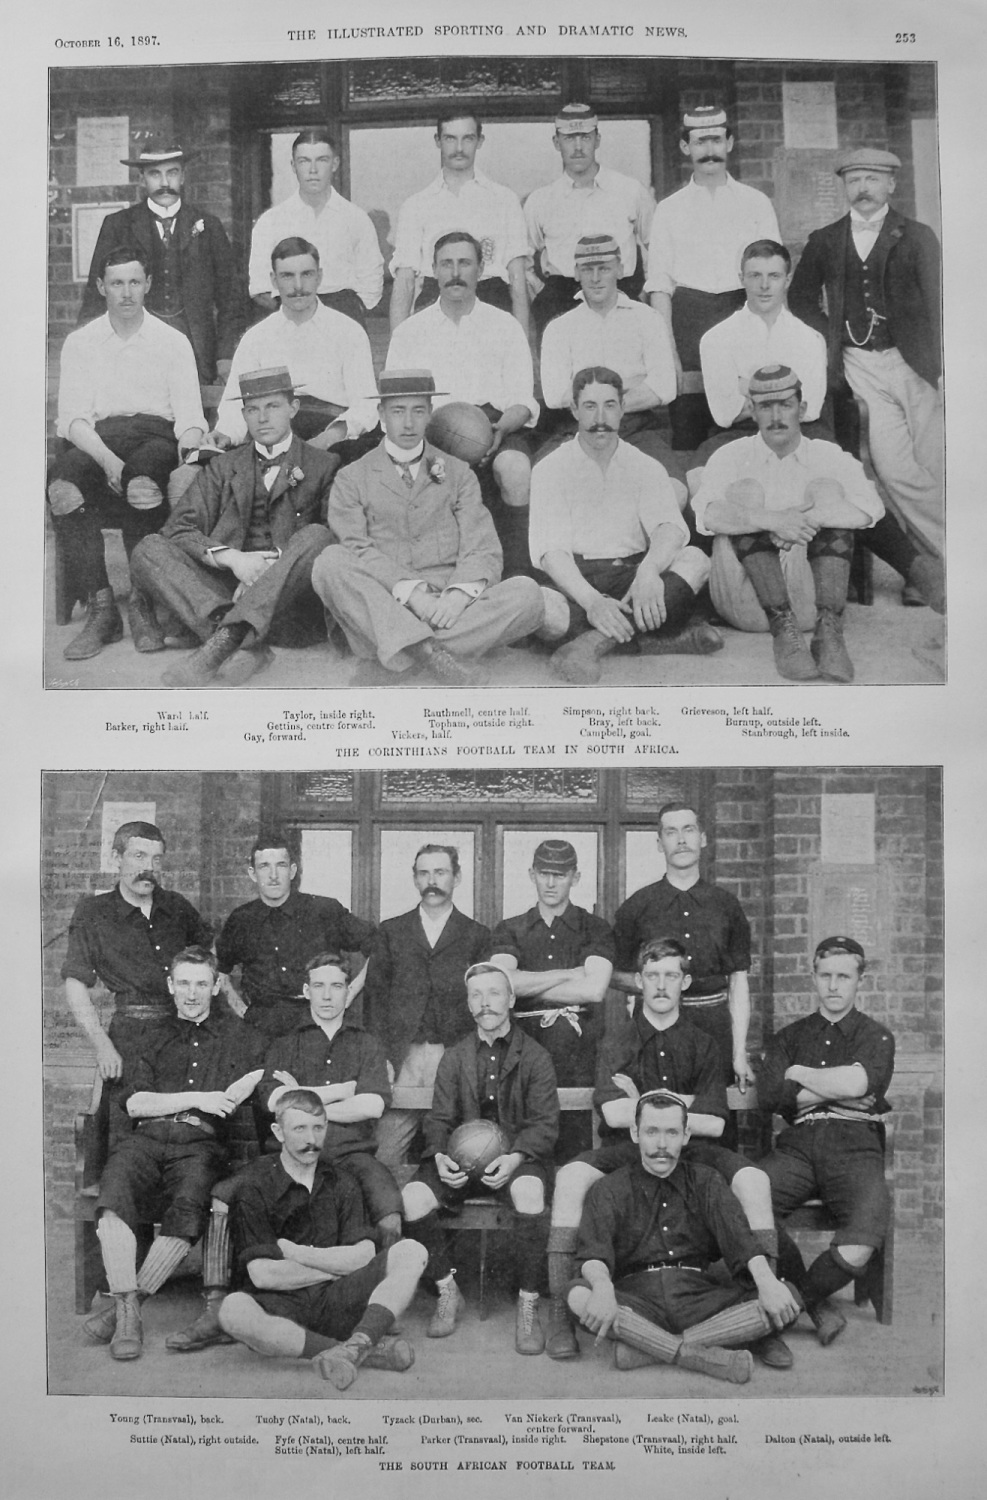 The Corinthians Football Team in South Africa. 1897